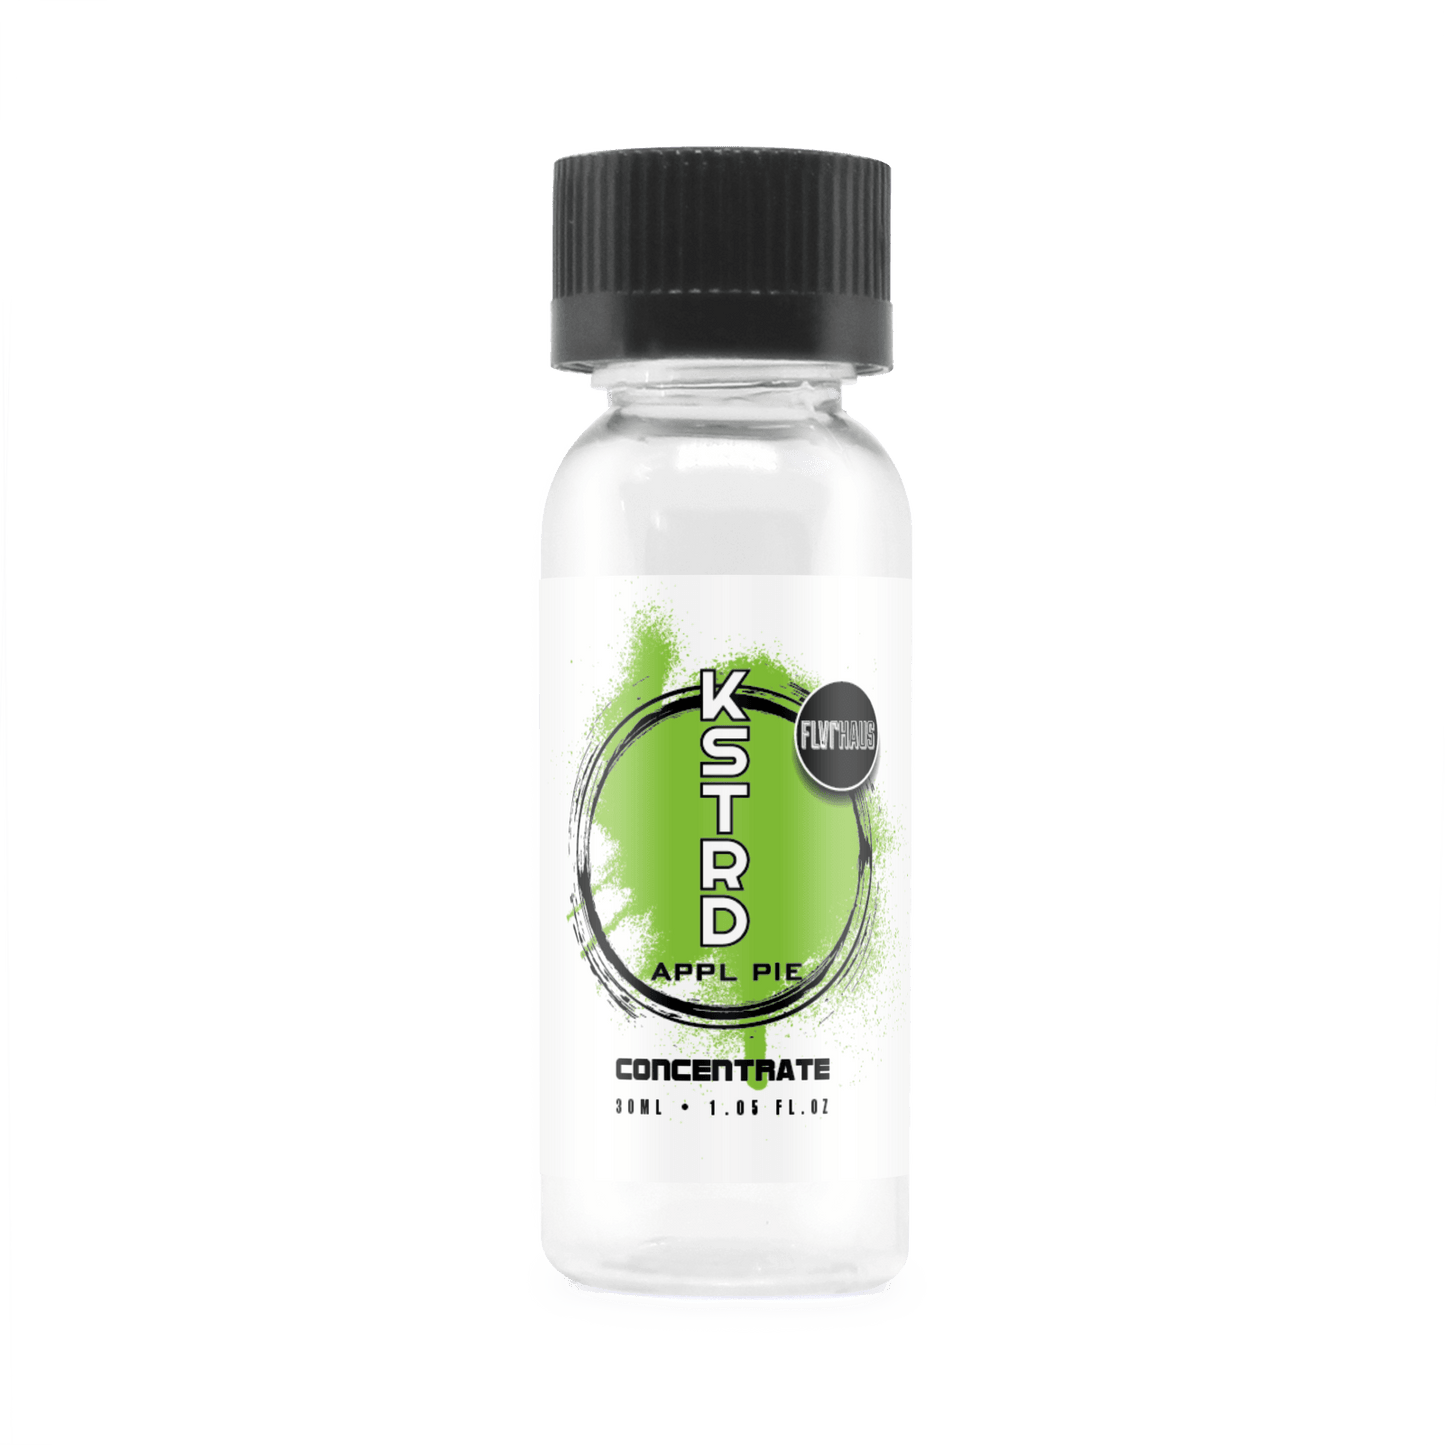 KSTRD - Appl Pie 30ml Concentrate by FLVRHAUS - The Ace Of Vapez